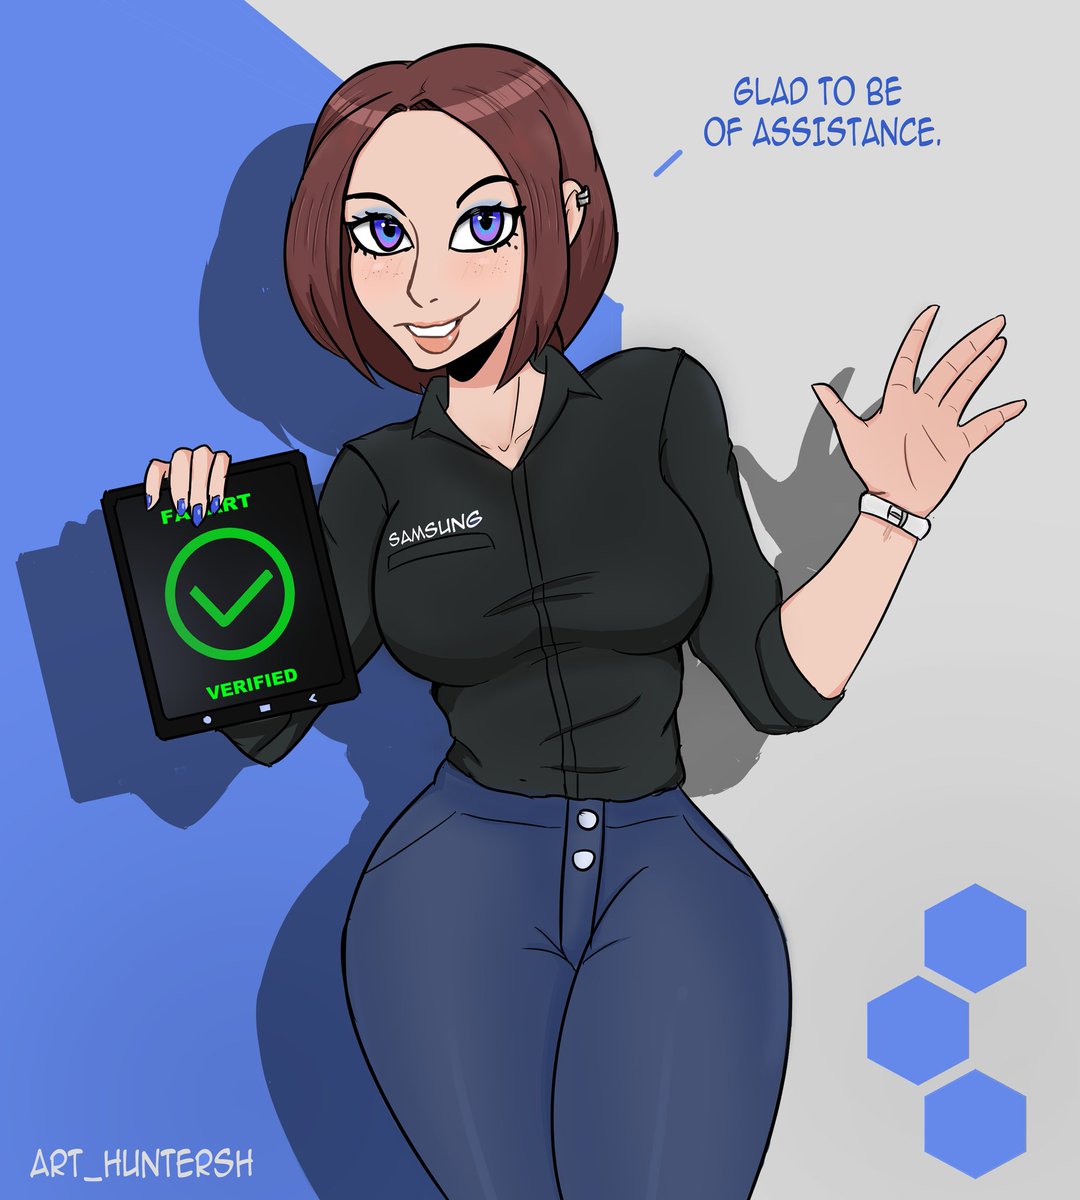 Rez Hunter Commissions Open I Joined In On This One Sam The Virtual Assistant For Samsung Samsung Sam Fanart Digitalart Animegirl Thicc Tablet Verified Characterart Samvirtualassistant Introduction Memes Pose